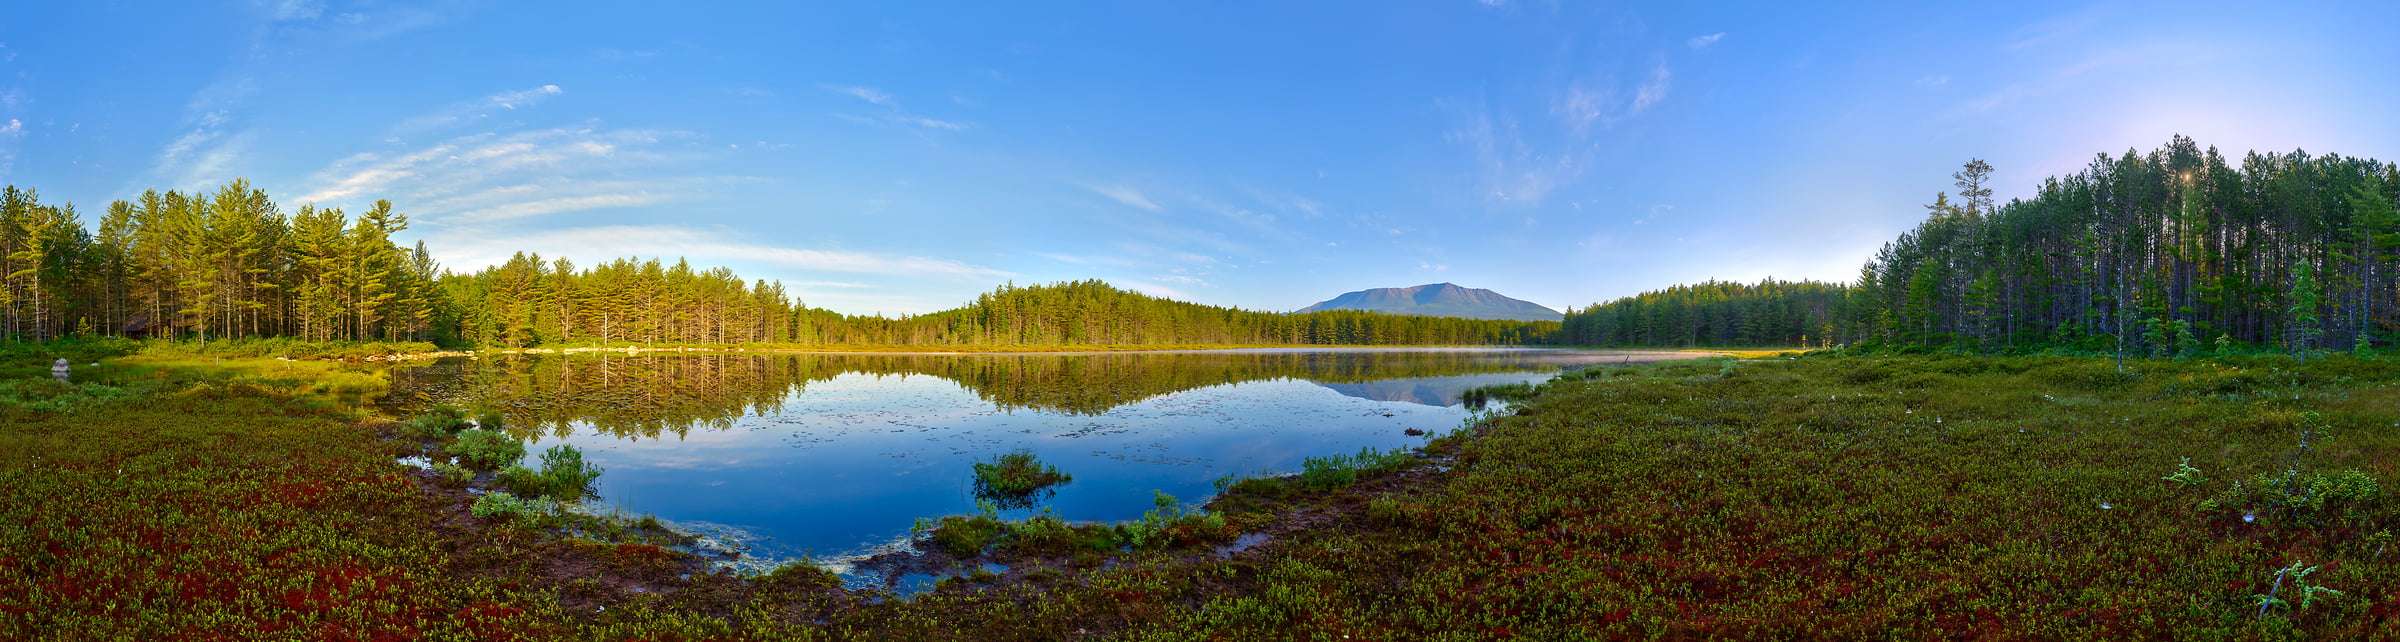 494 megapixels! A very high resolution, large-format VAST photo of Mt. Katahdin and Sunday Pond; fine art landscape photograph created by Aaron Priest in Baxter State Park, Maine